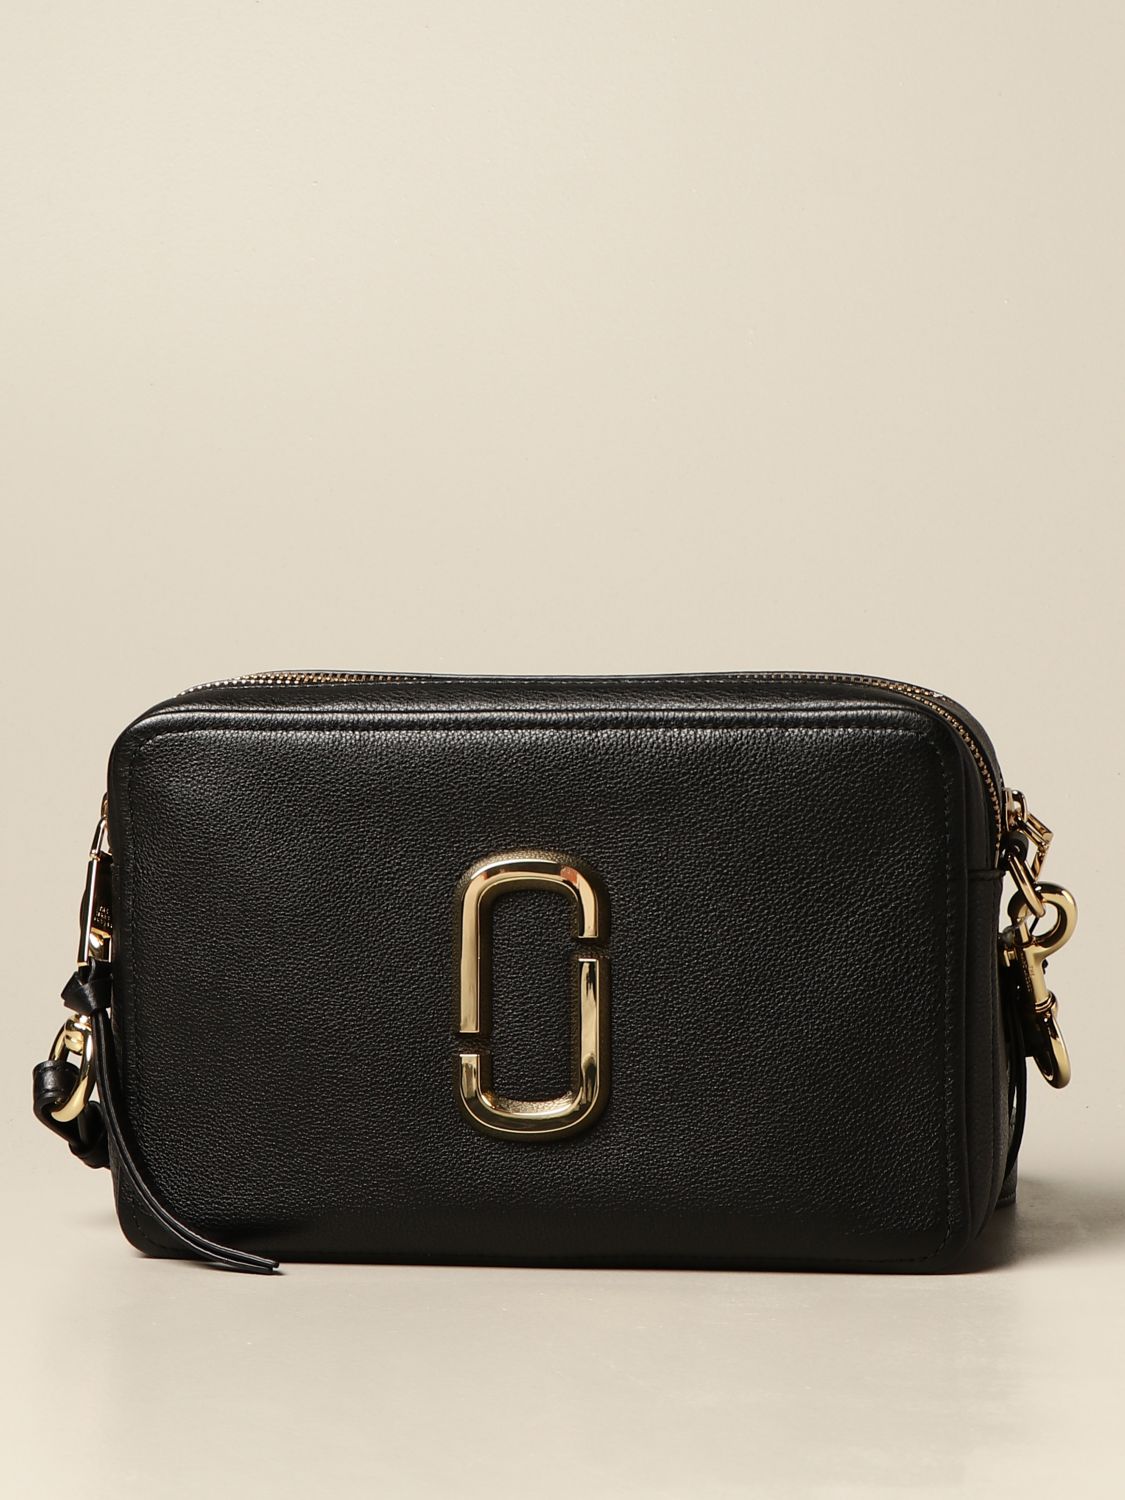 MARC JACOBS: The Softshot 27 bag in hammered leather | Crossbody Bags ...